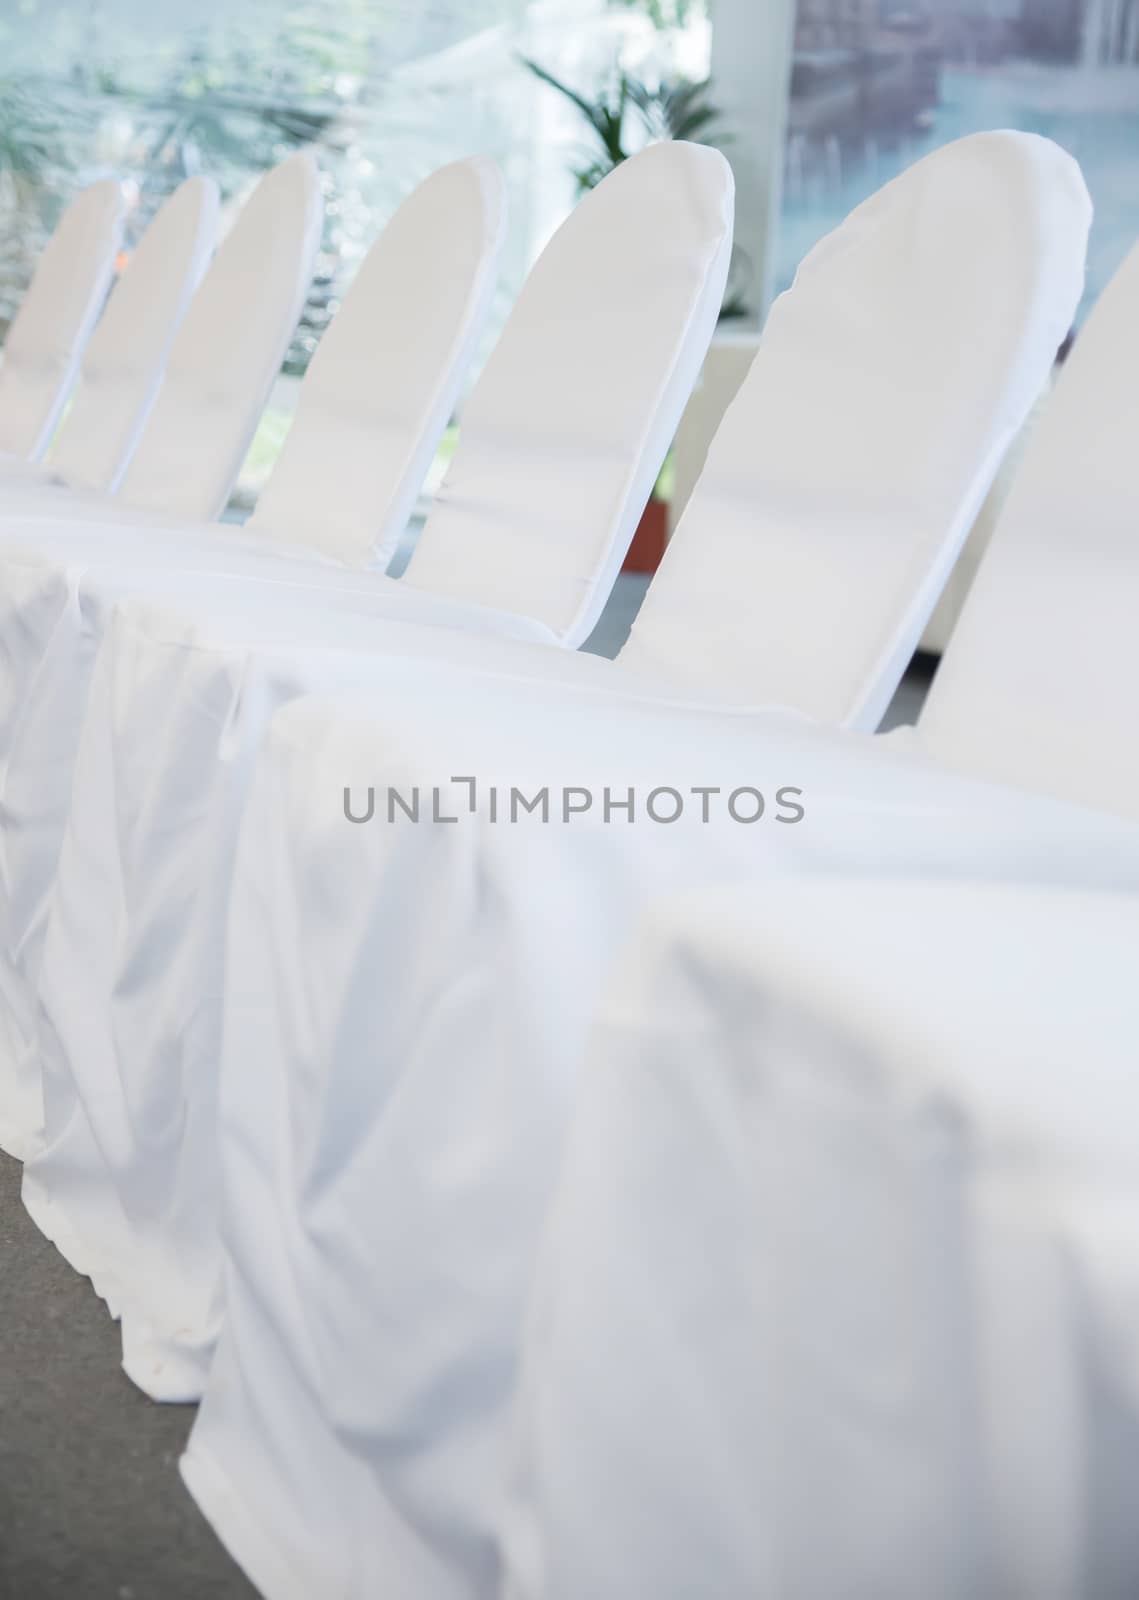 chairs with white fabric cover for celebrations by vlaru